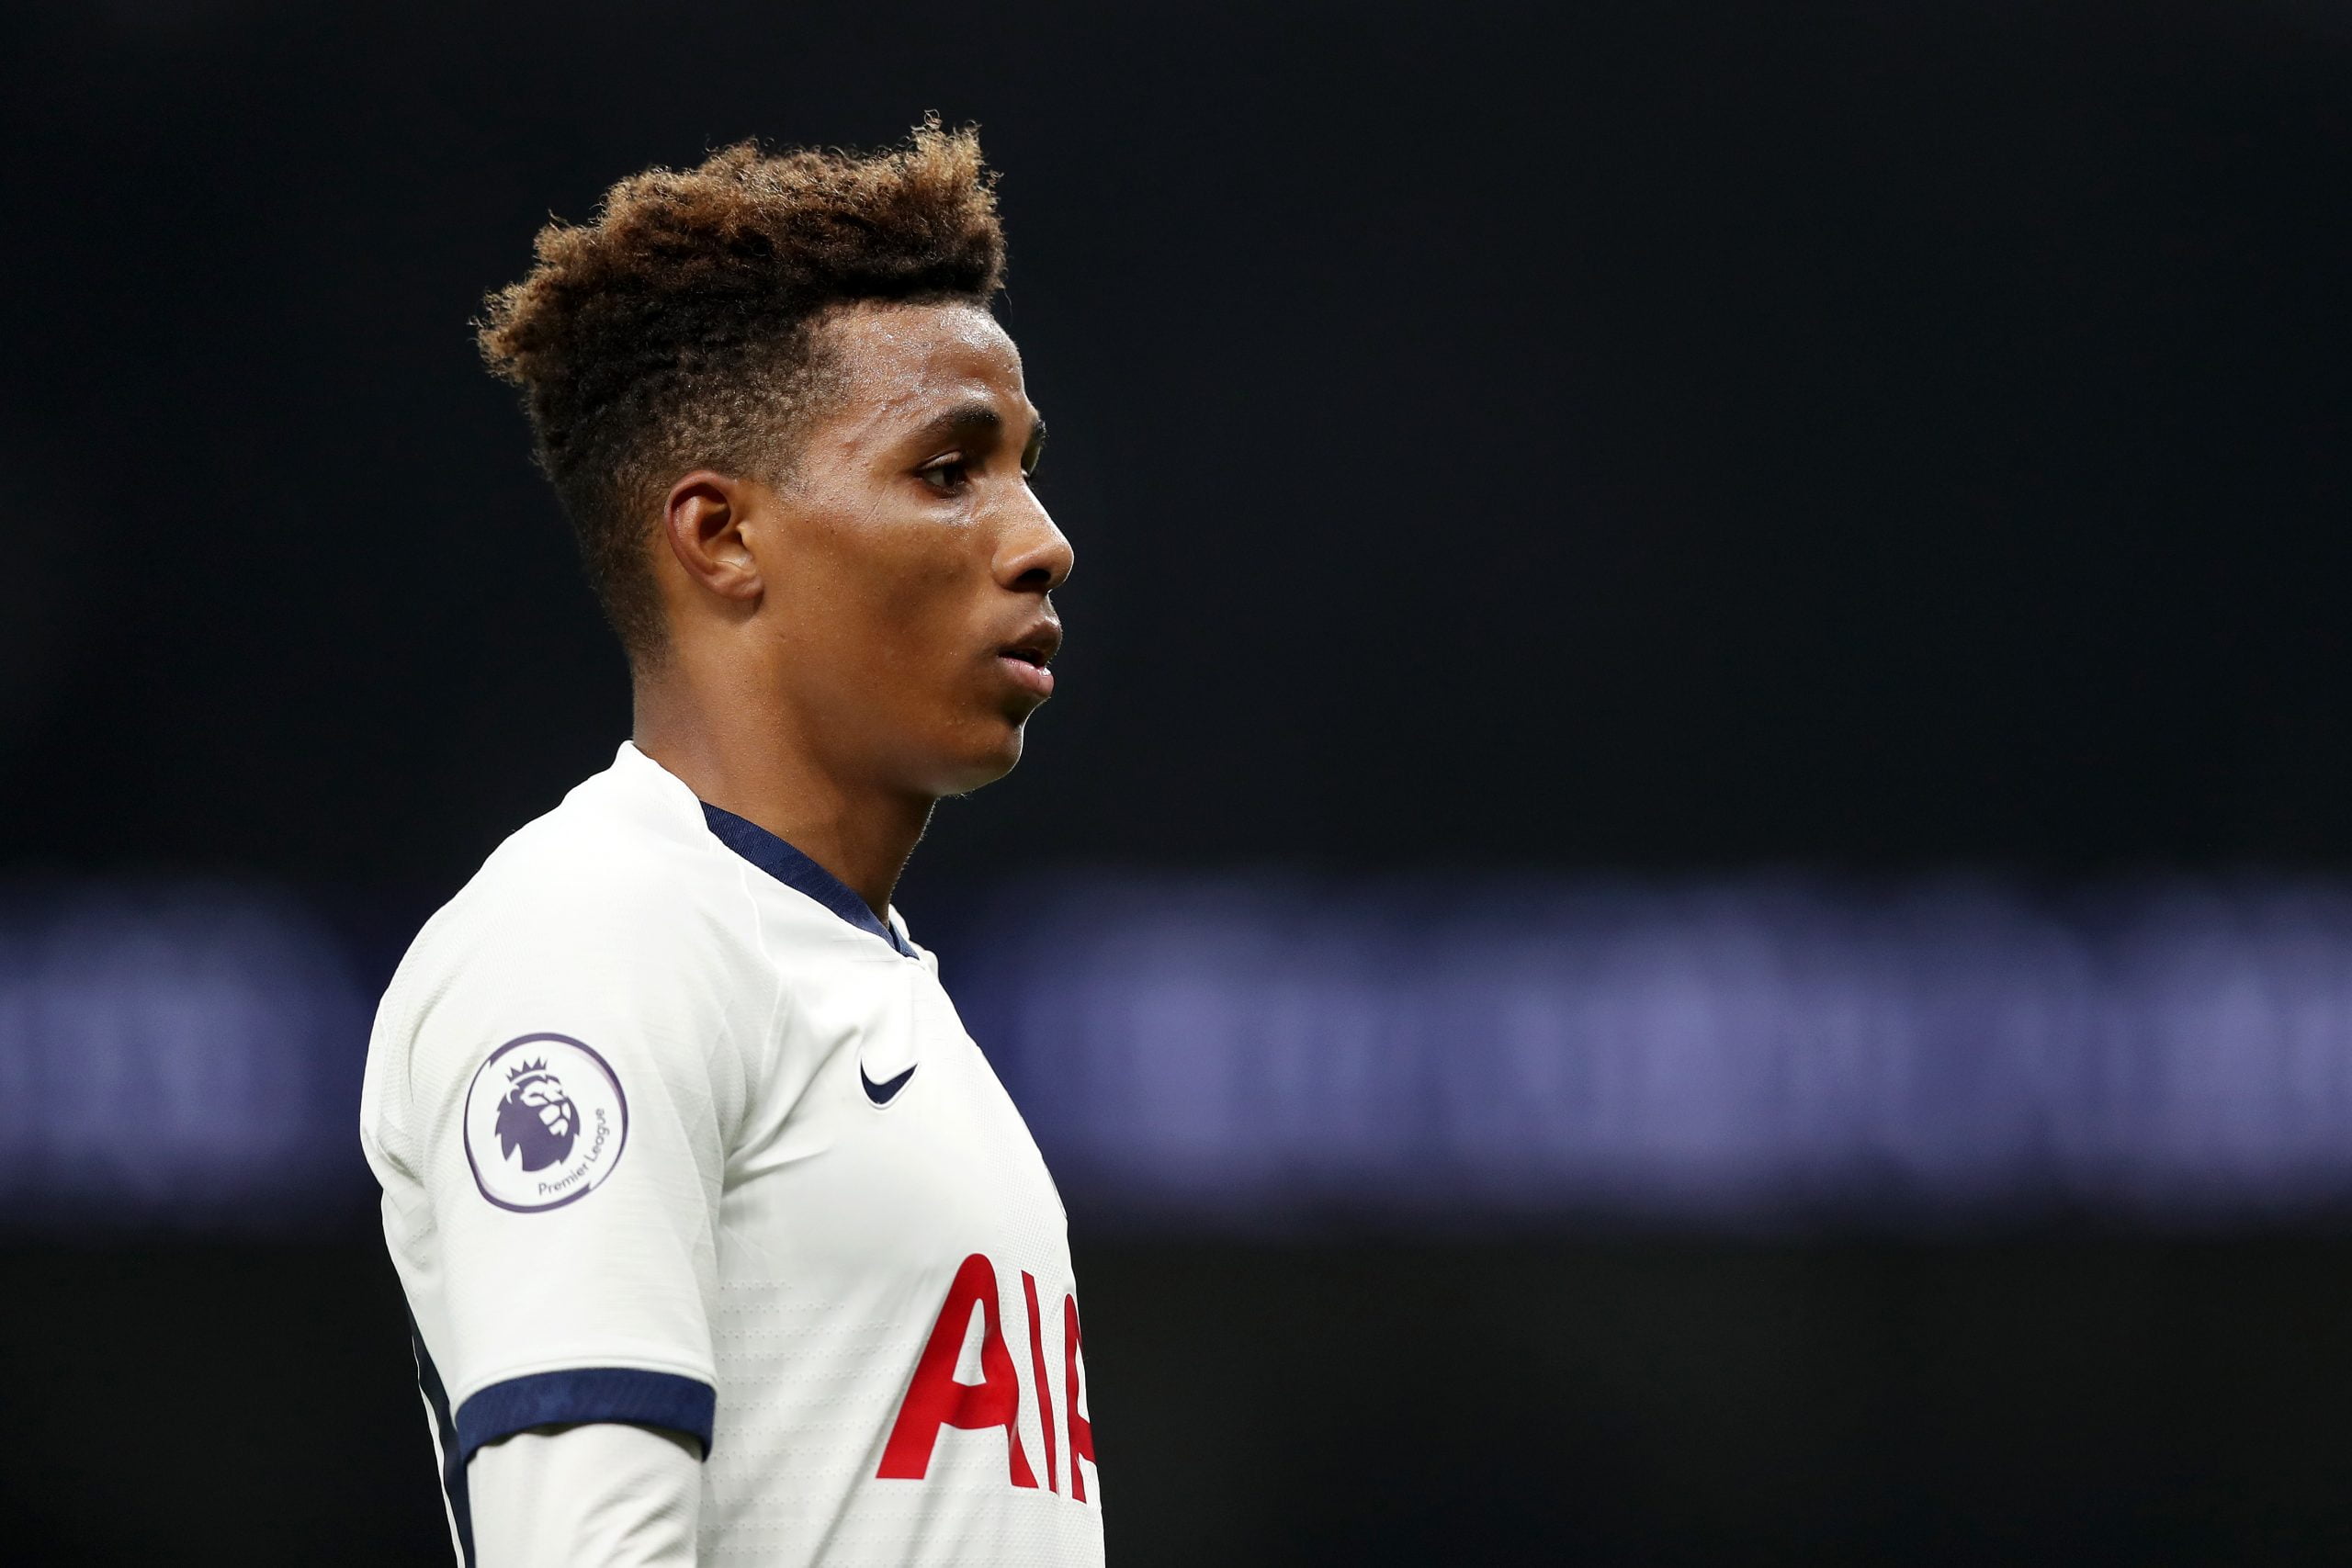 Gedson Fernandes is closing on his exit from Tottenham - He has been an outcast.